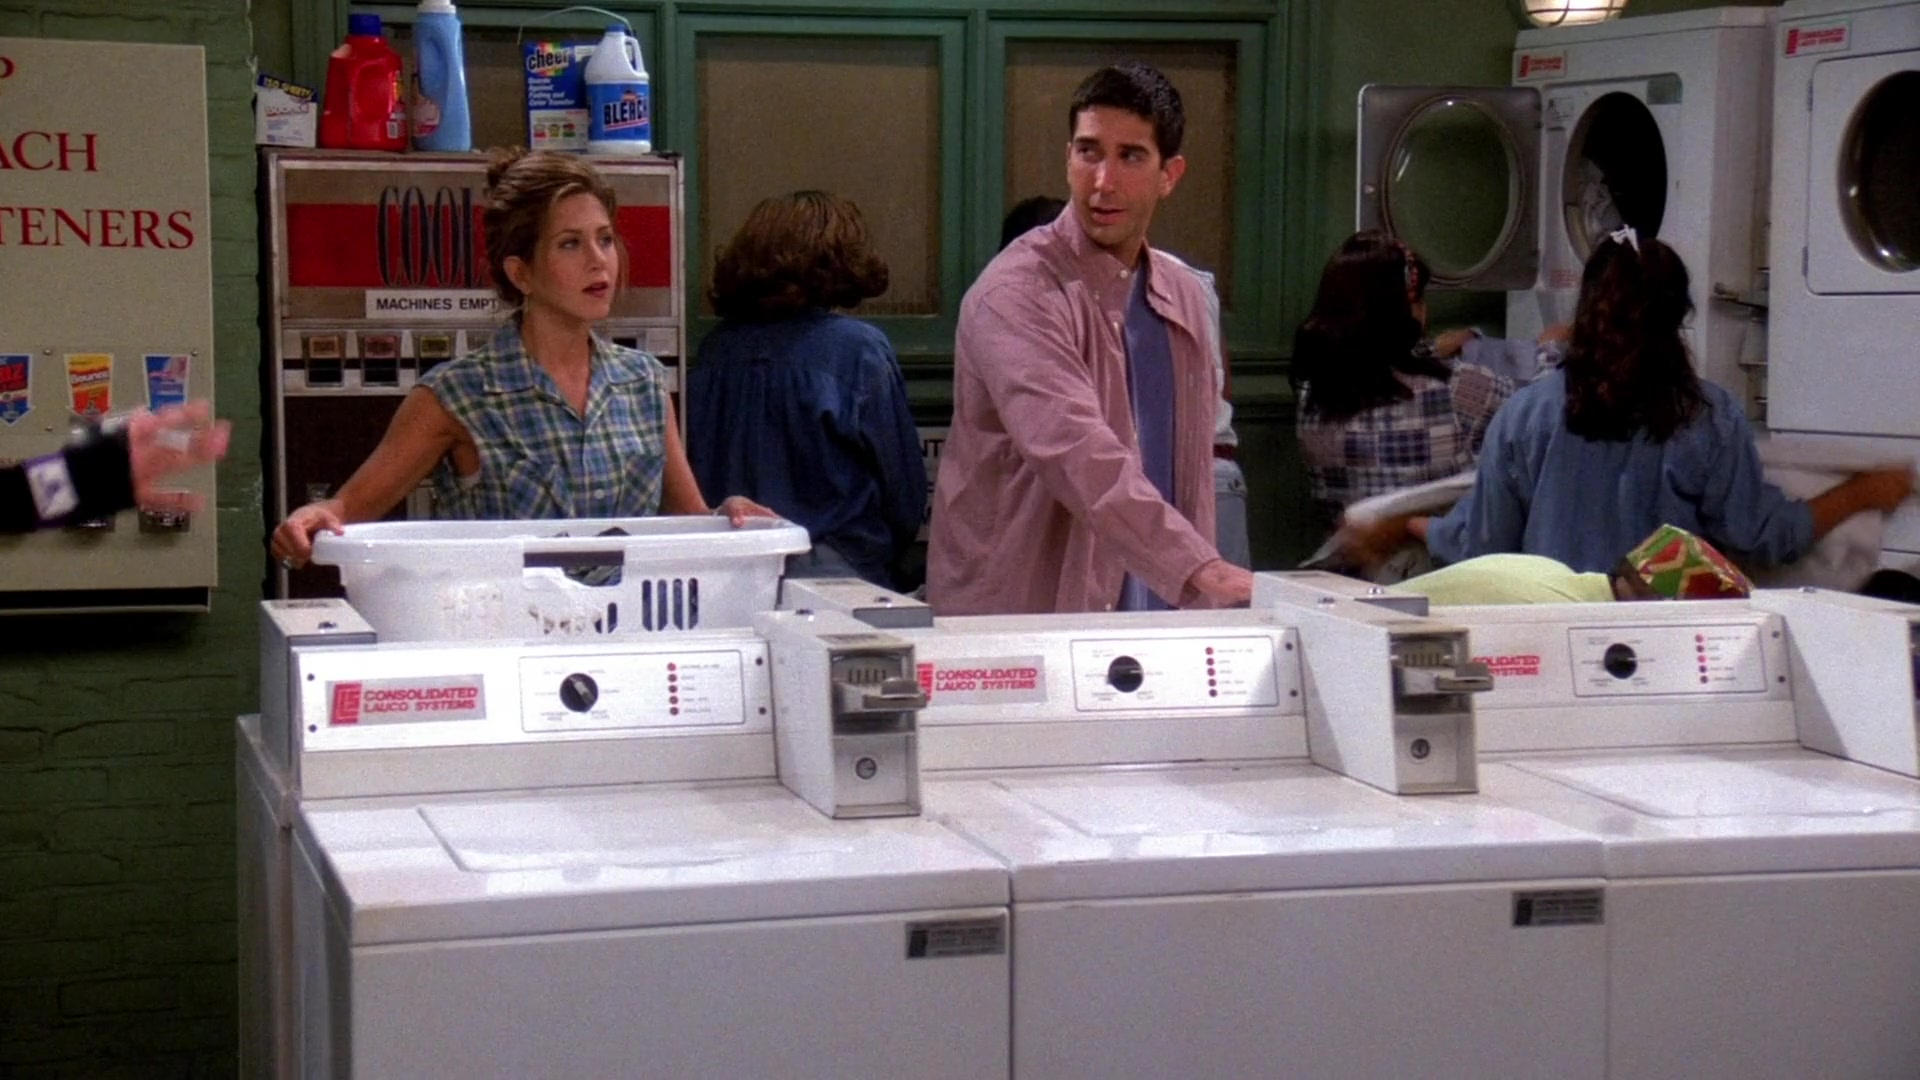 The one with the east german laundry detergent